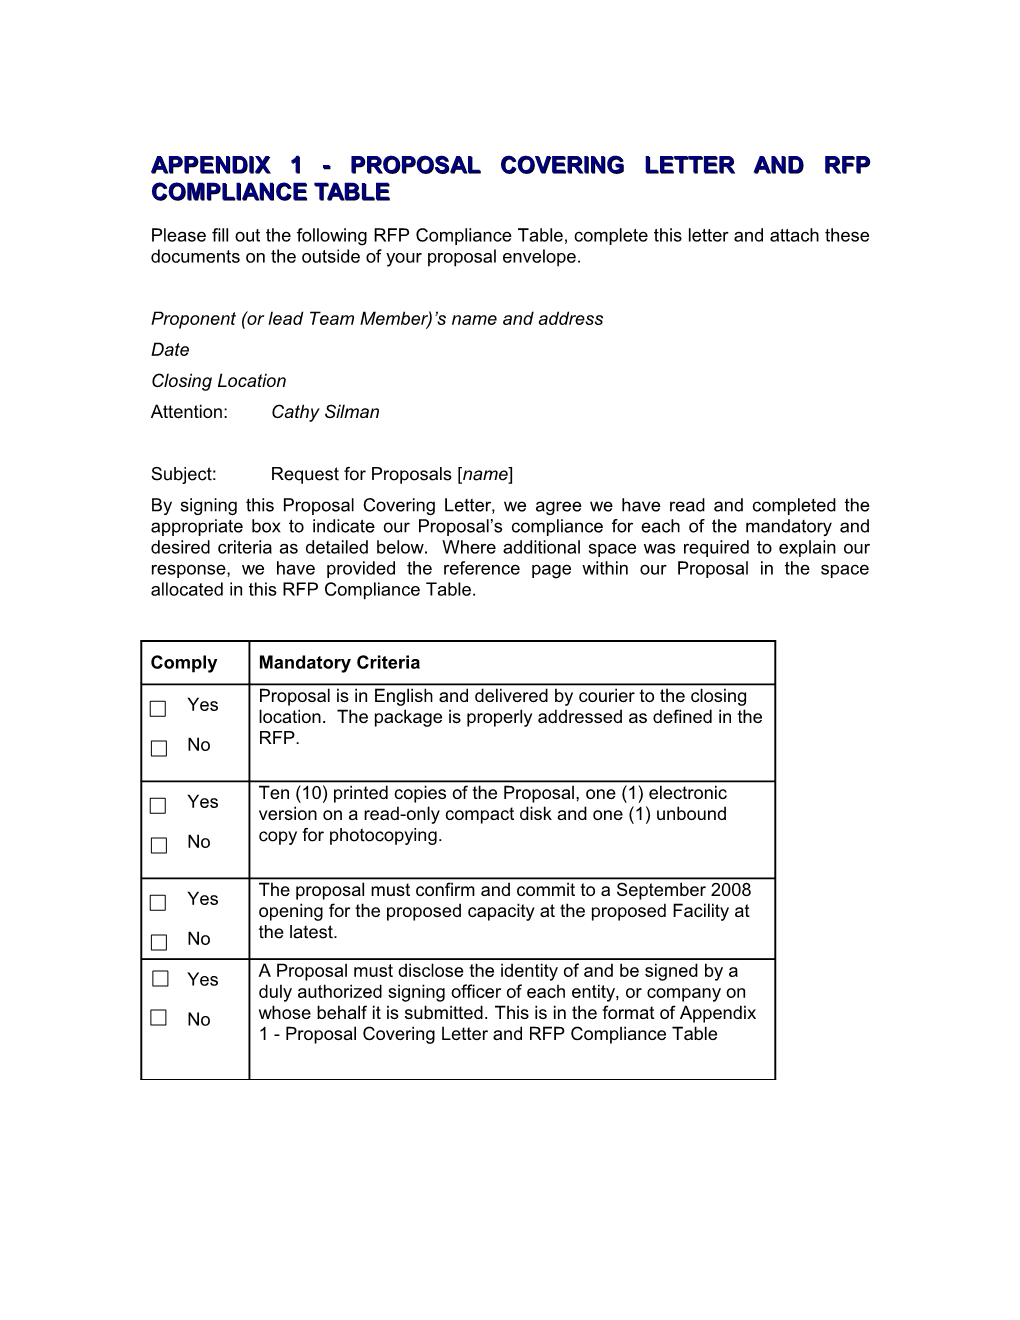 Appendix 1 - Proposal Covering Letter And Rfp Compliance Table